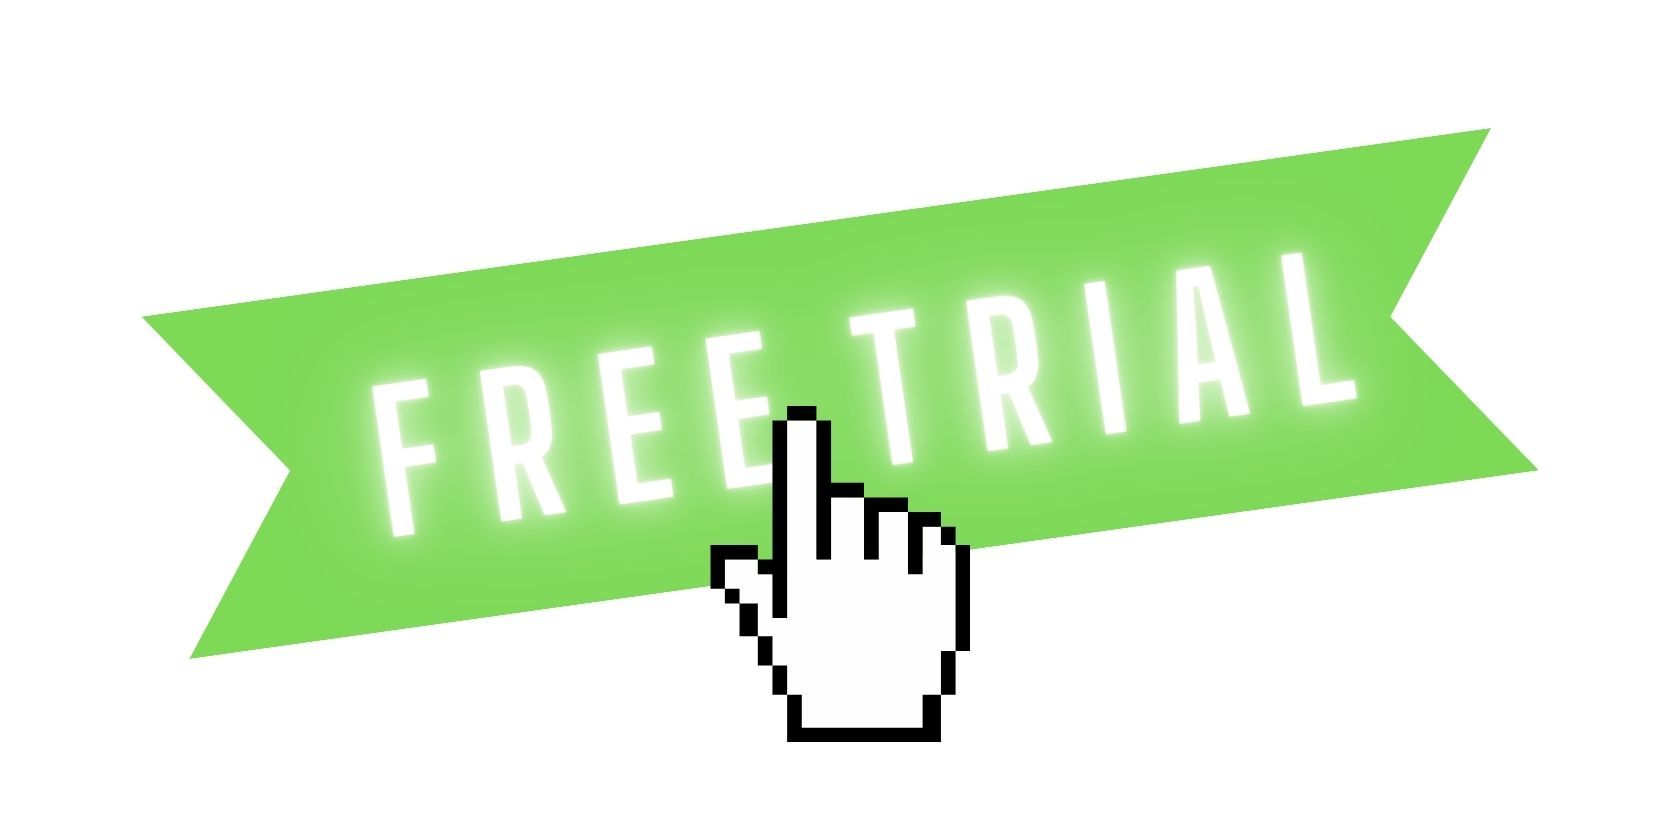 Free trial banner and a mouse pointer on white background 